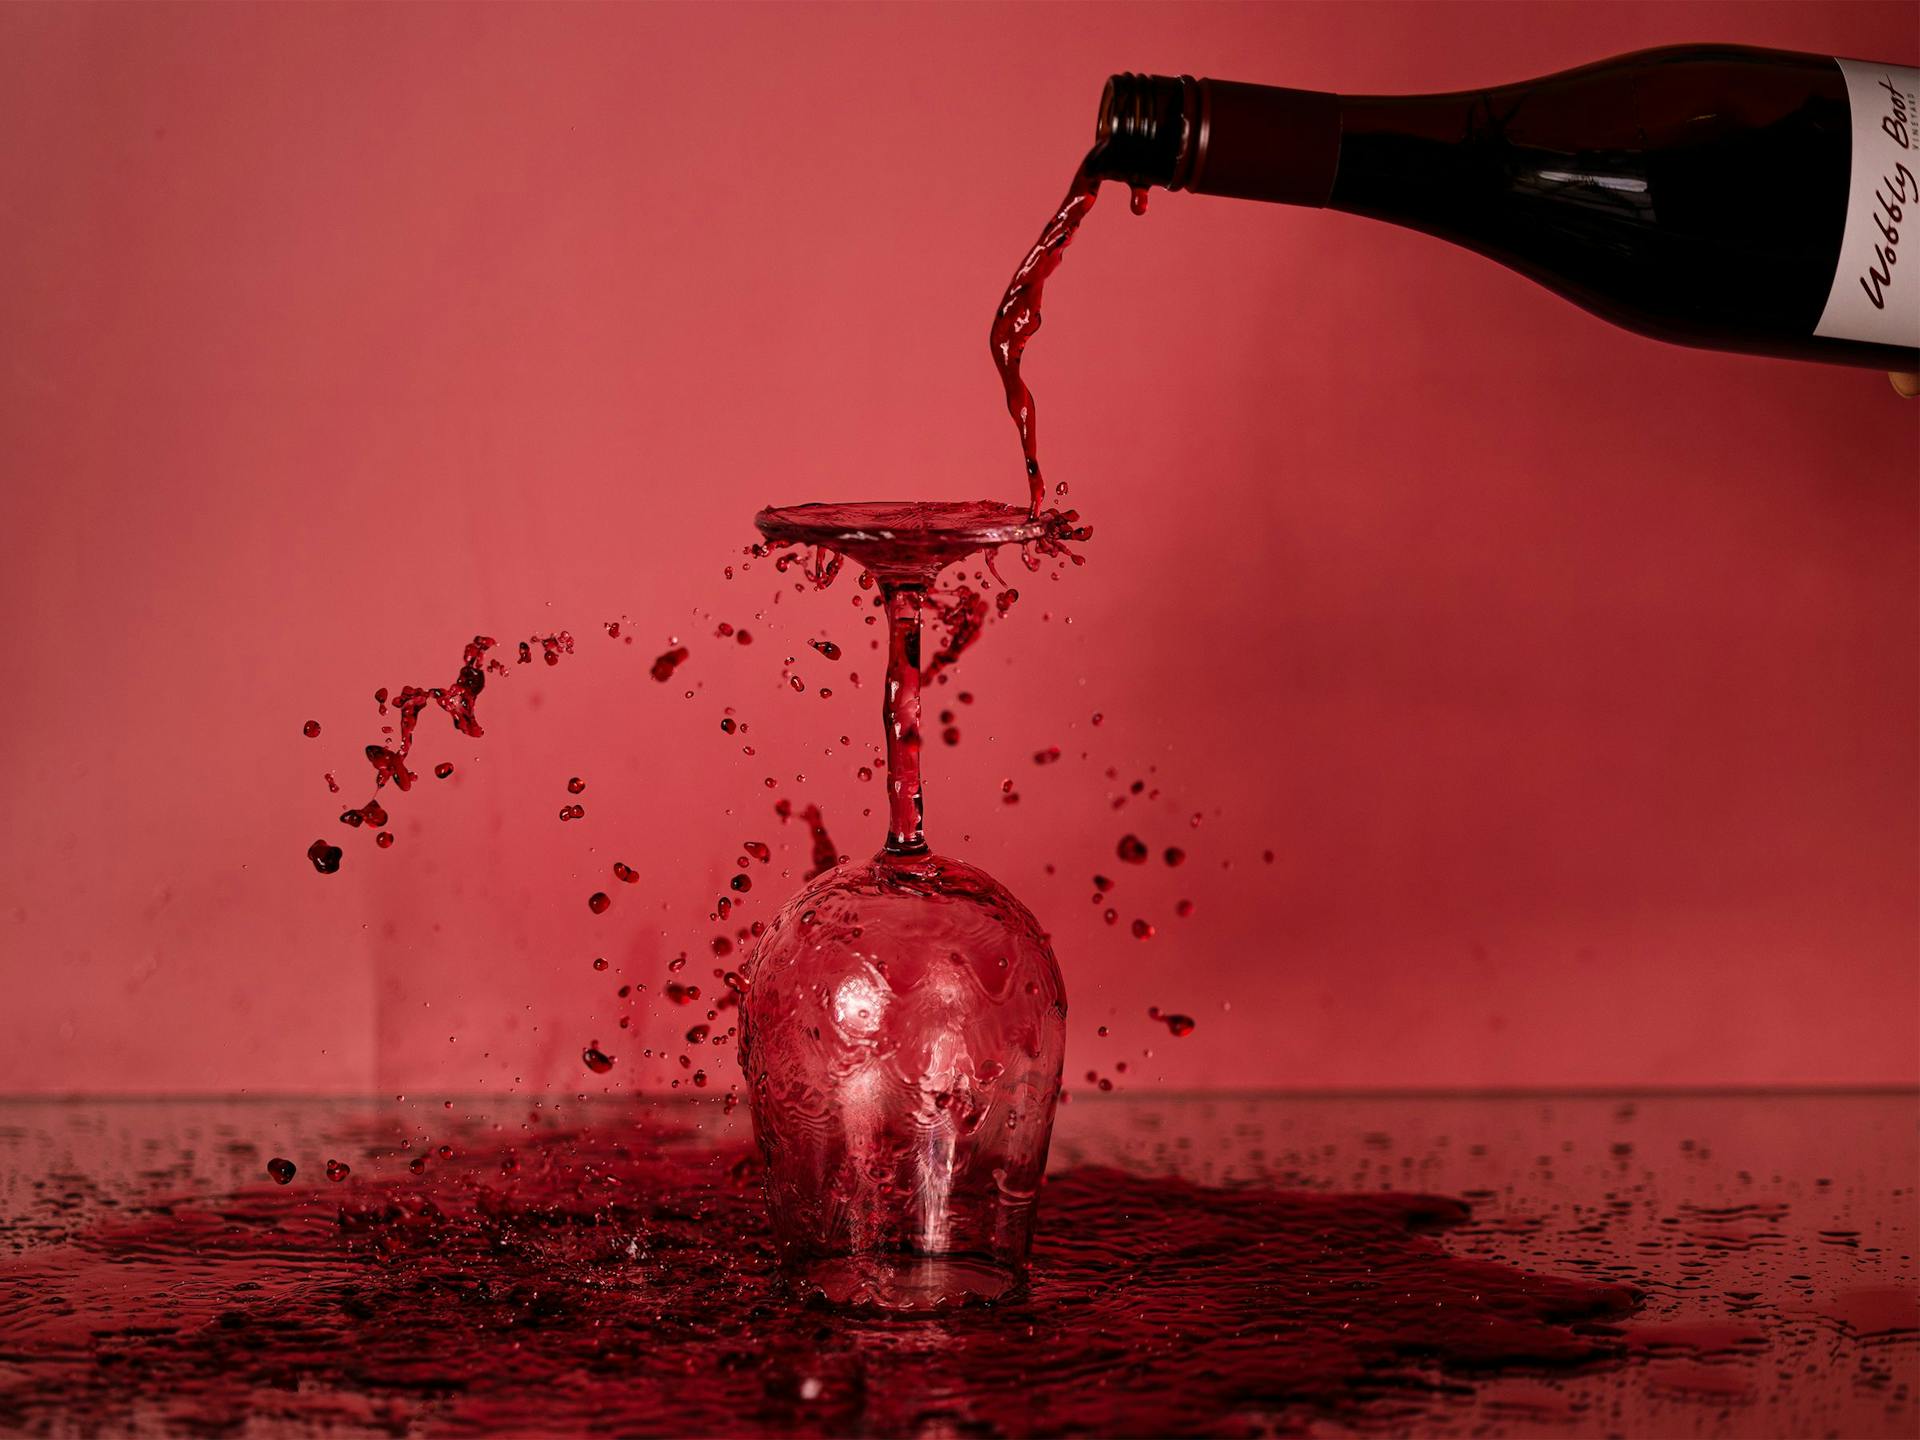 A bottle of red wine being poured on an overturned wine glass causing a big puddle